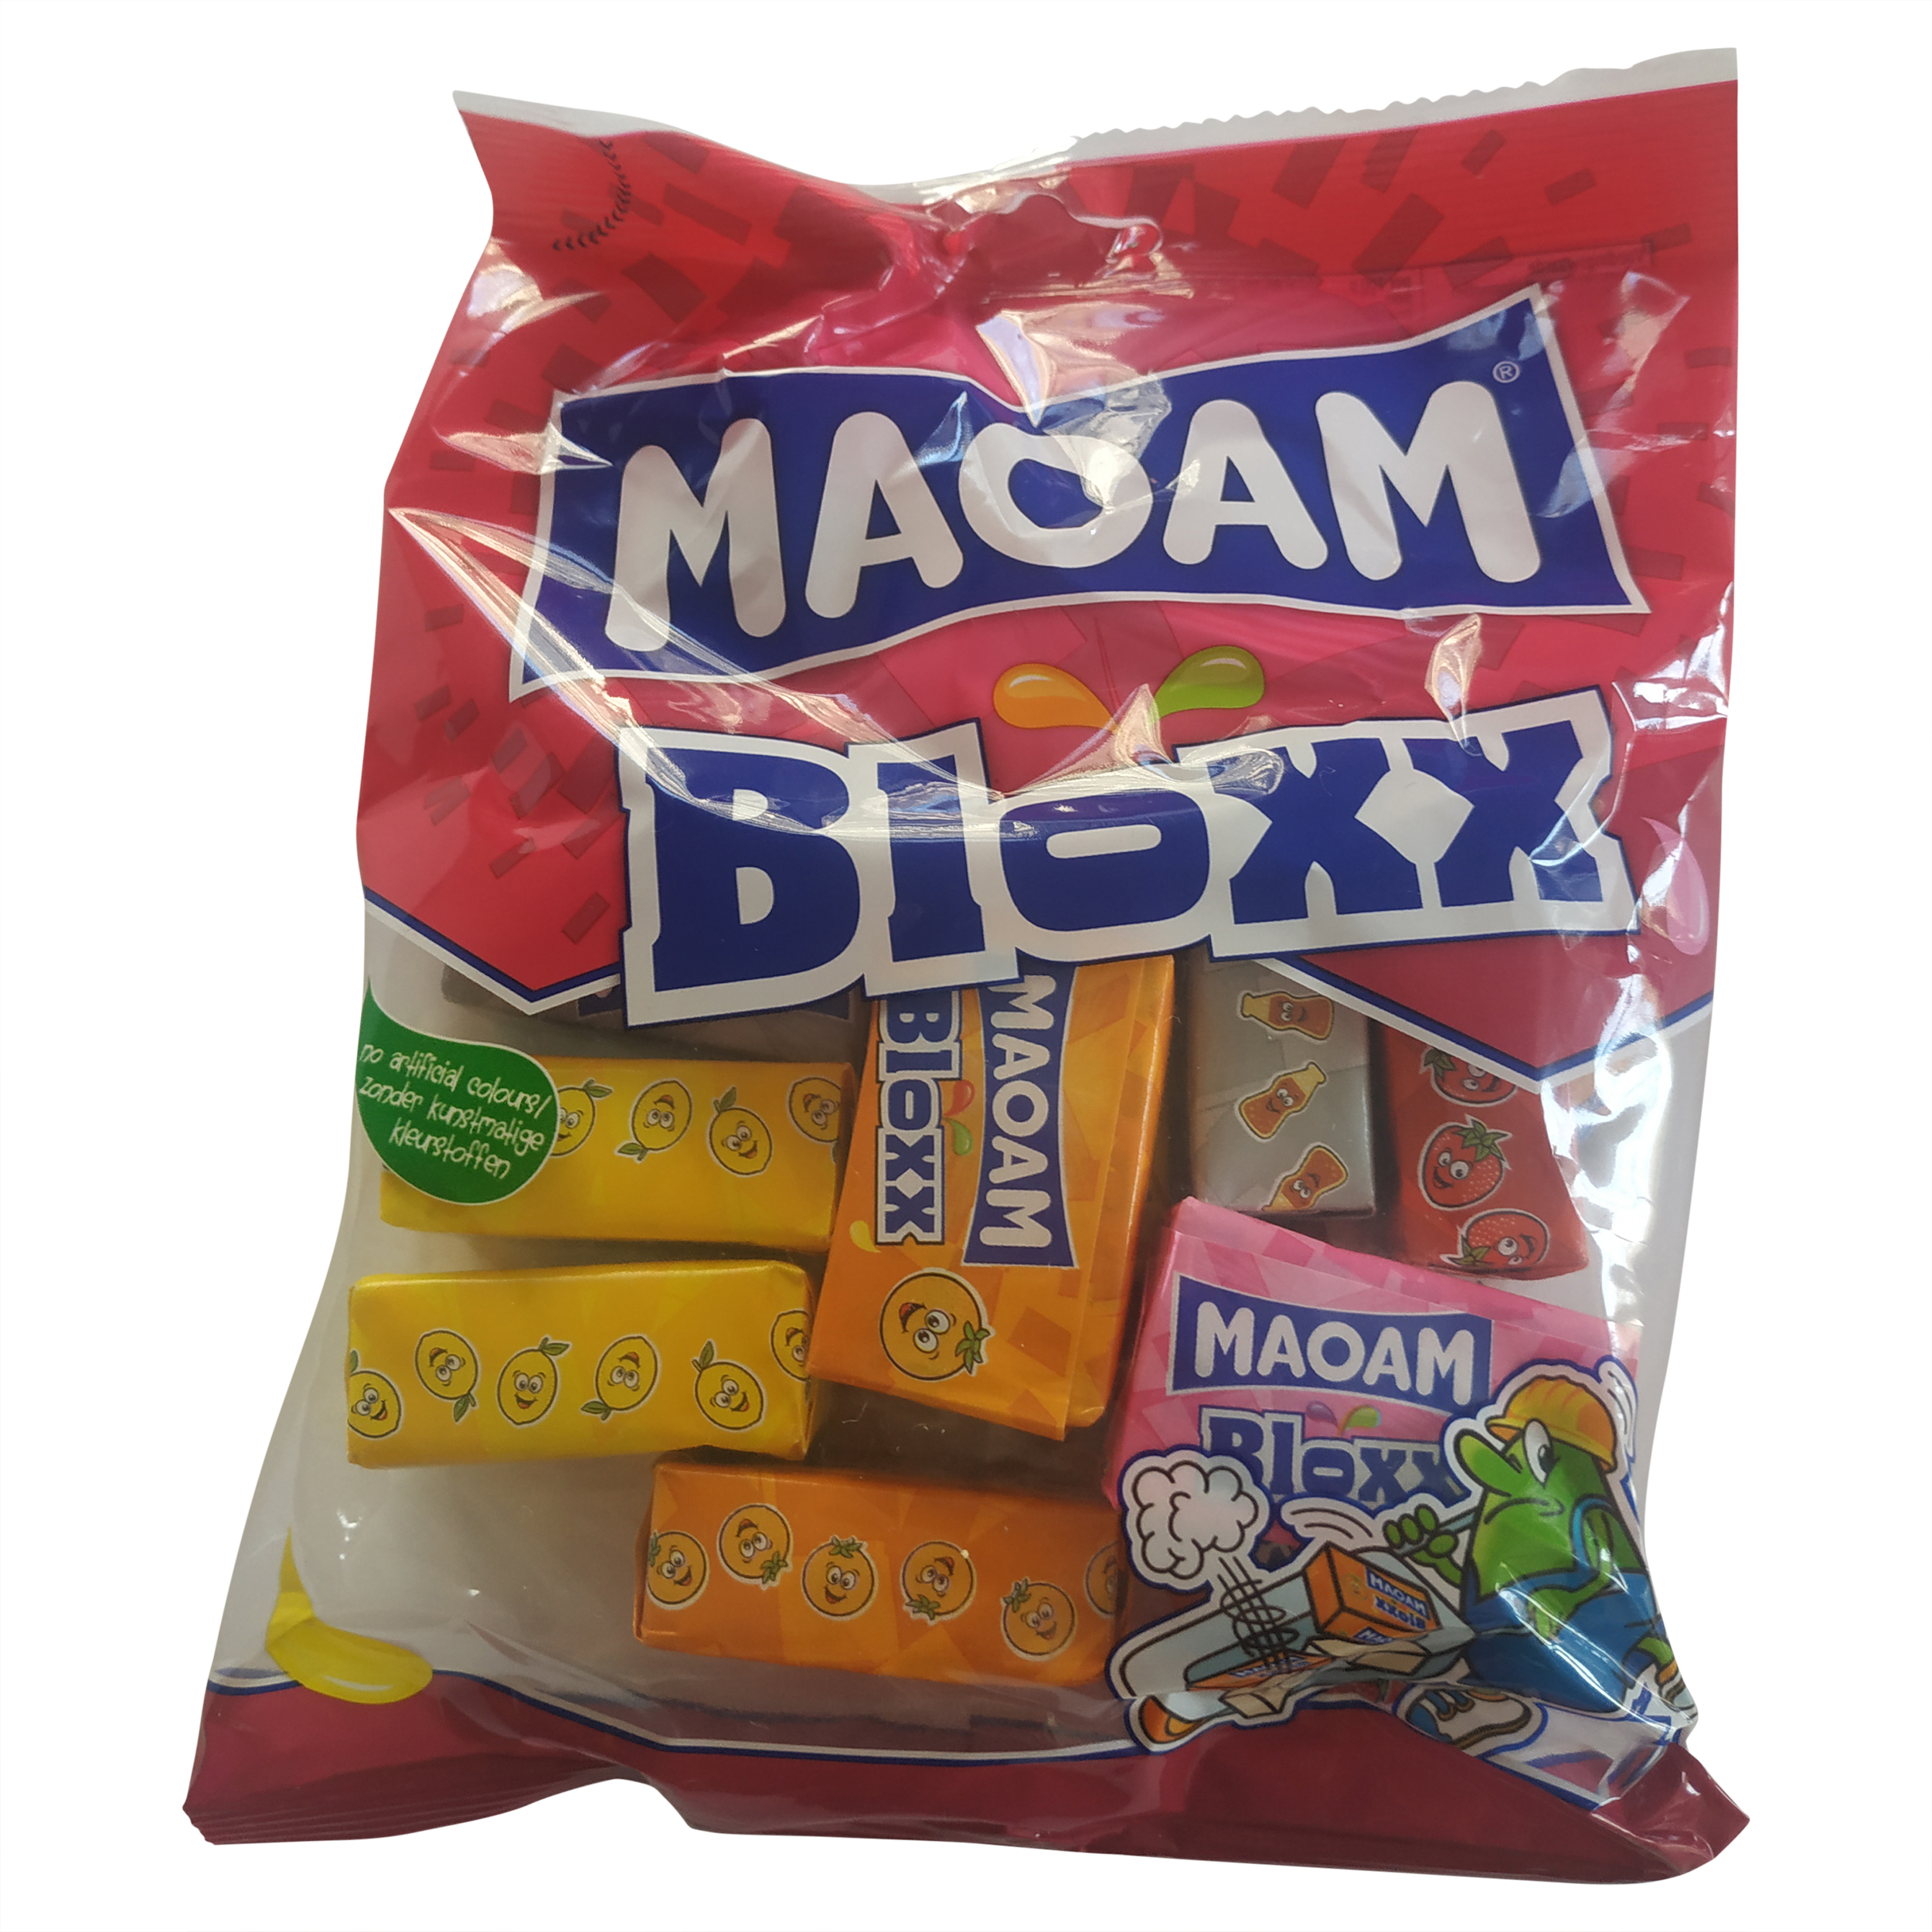 Maoam Bloxx, Maoam Sweets, 8 Pieces of Unique Maoam Bloxx Flavors, Maoam  Candy